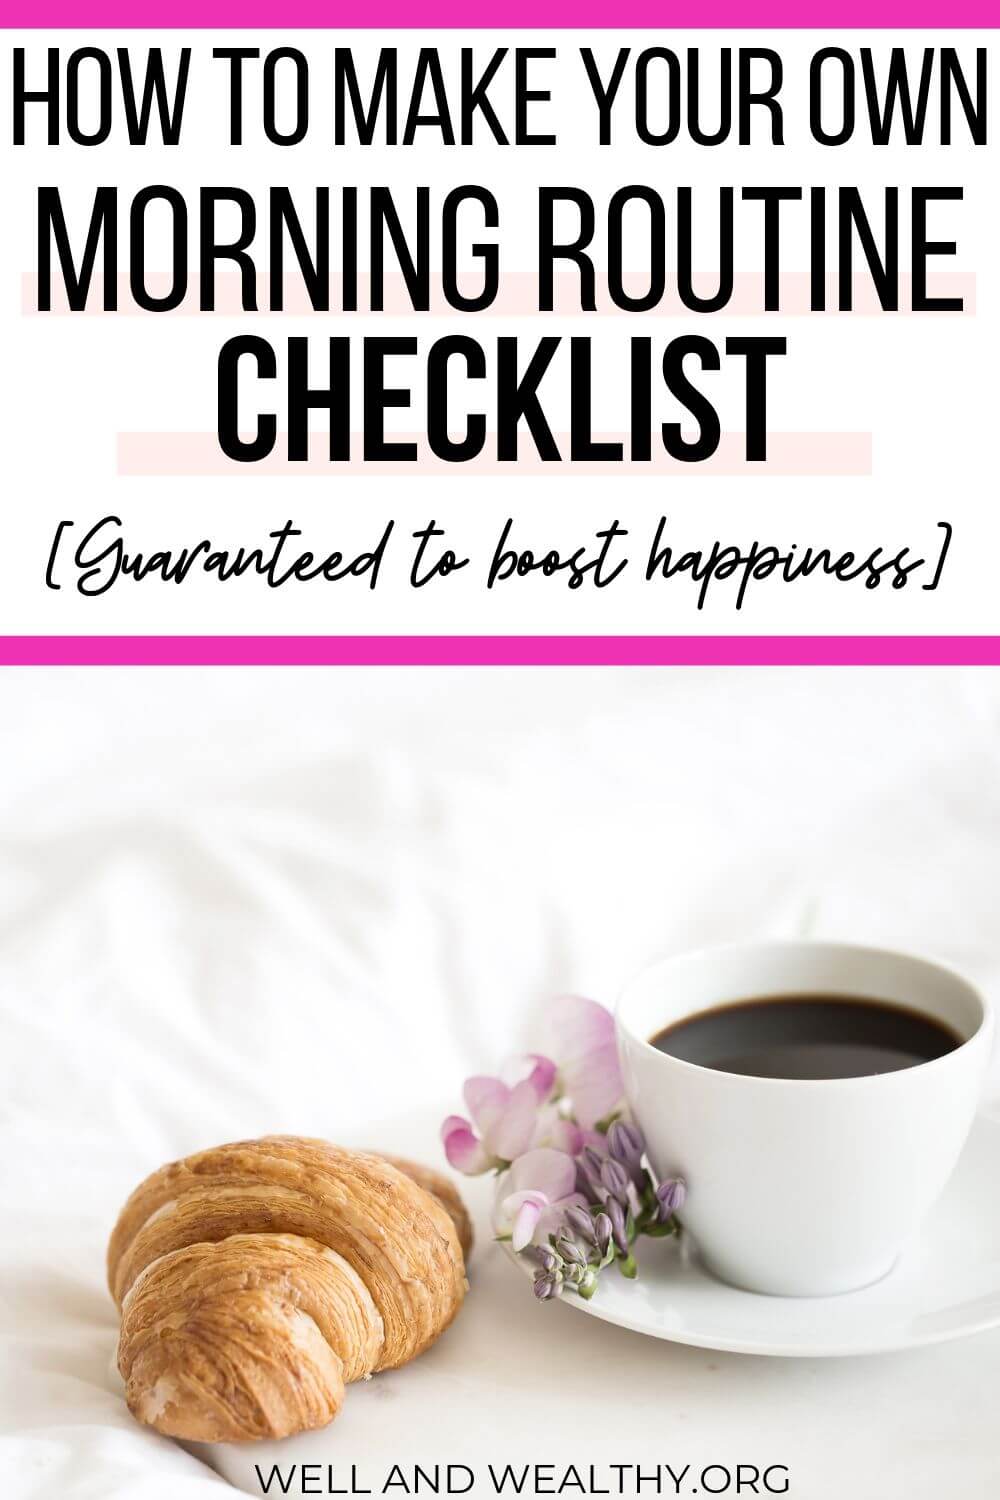 Looking for adult morning routine ideas to help make your life healthy and productive? Then this post will help you, especially for women, you will learn how to make an amazing morning routine checklist. These tips will help you get in that all-important self-care before work. PLUS don’t forget to grab your free printable checklist! #morningroutine #freeprintable #getorganized #selfcare